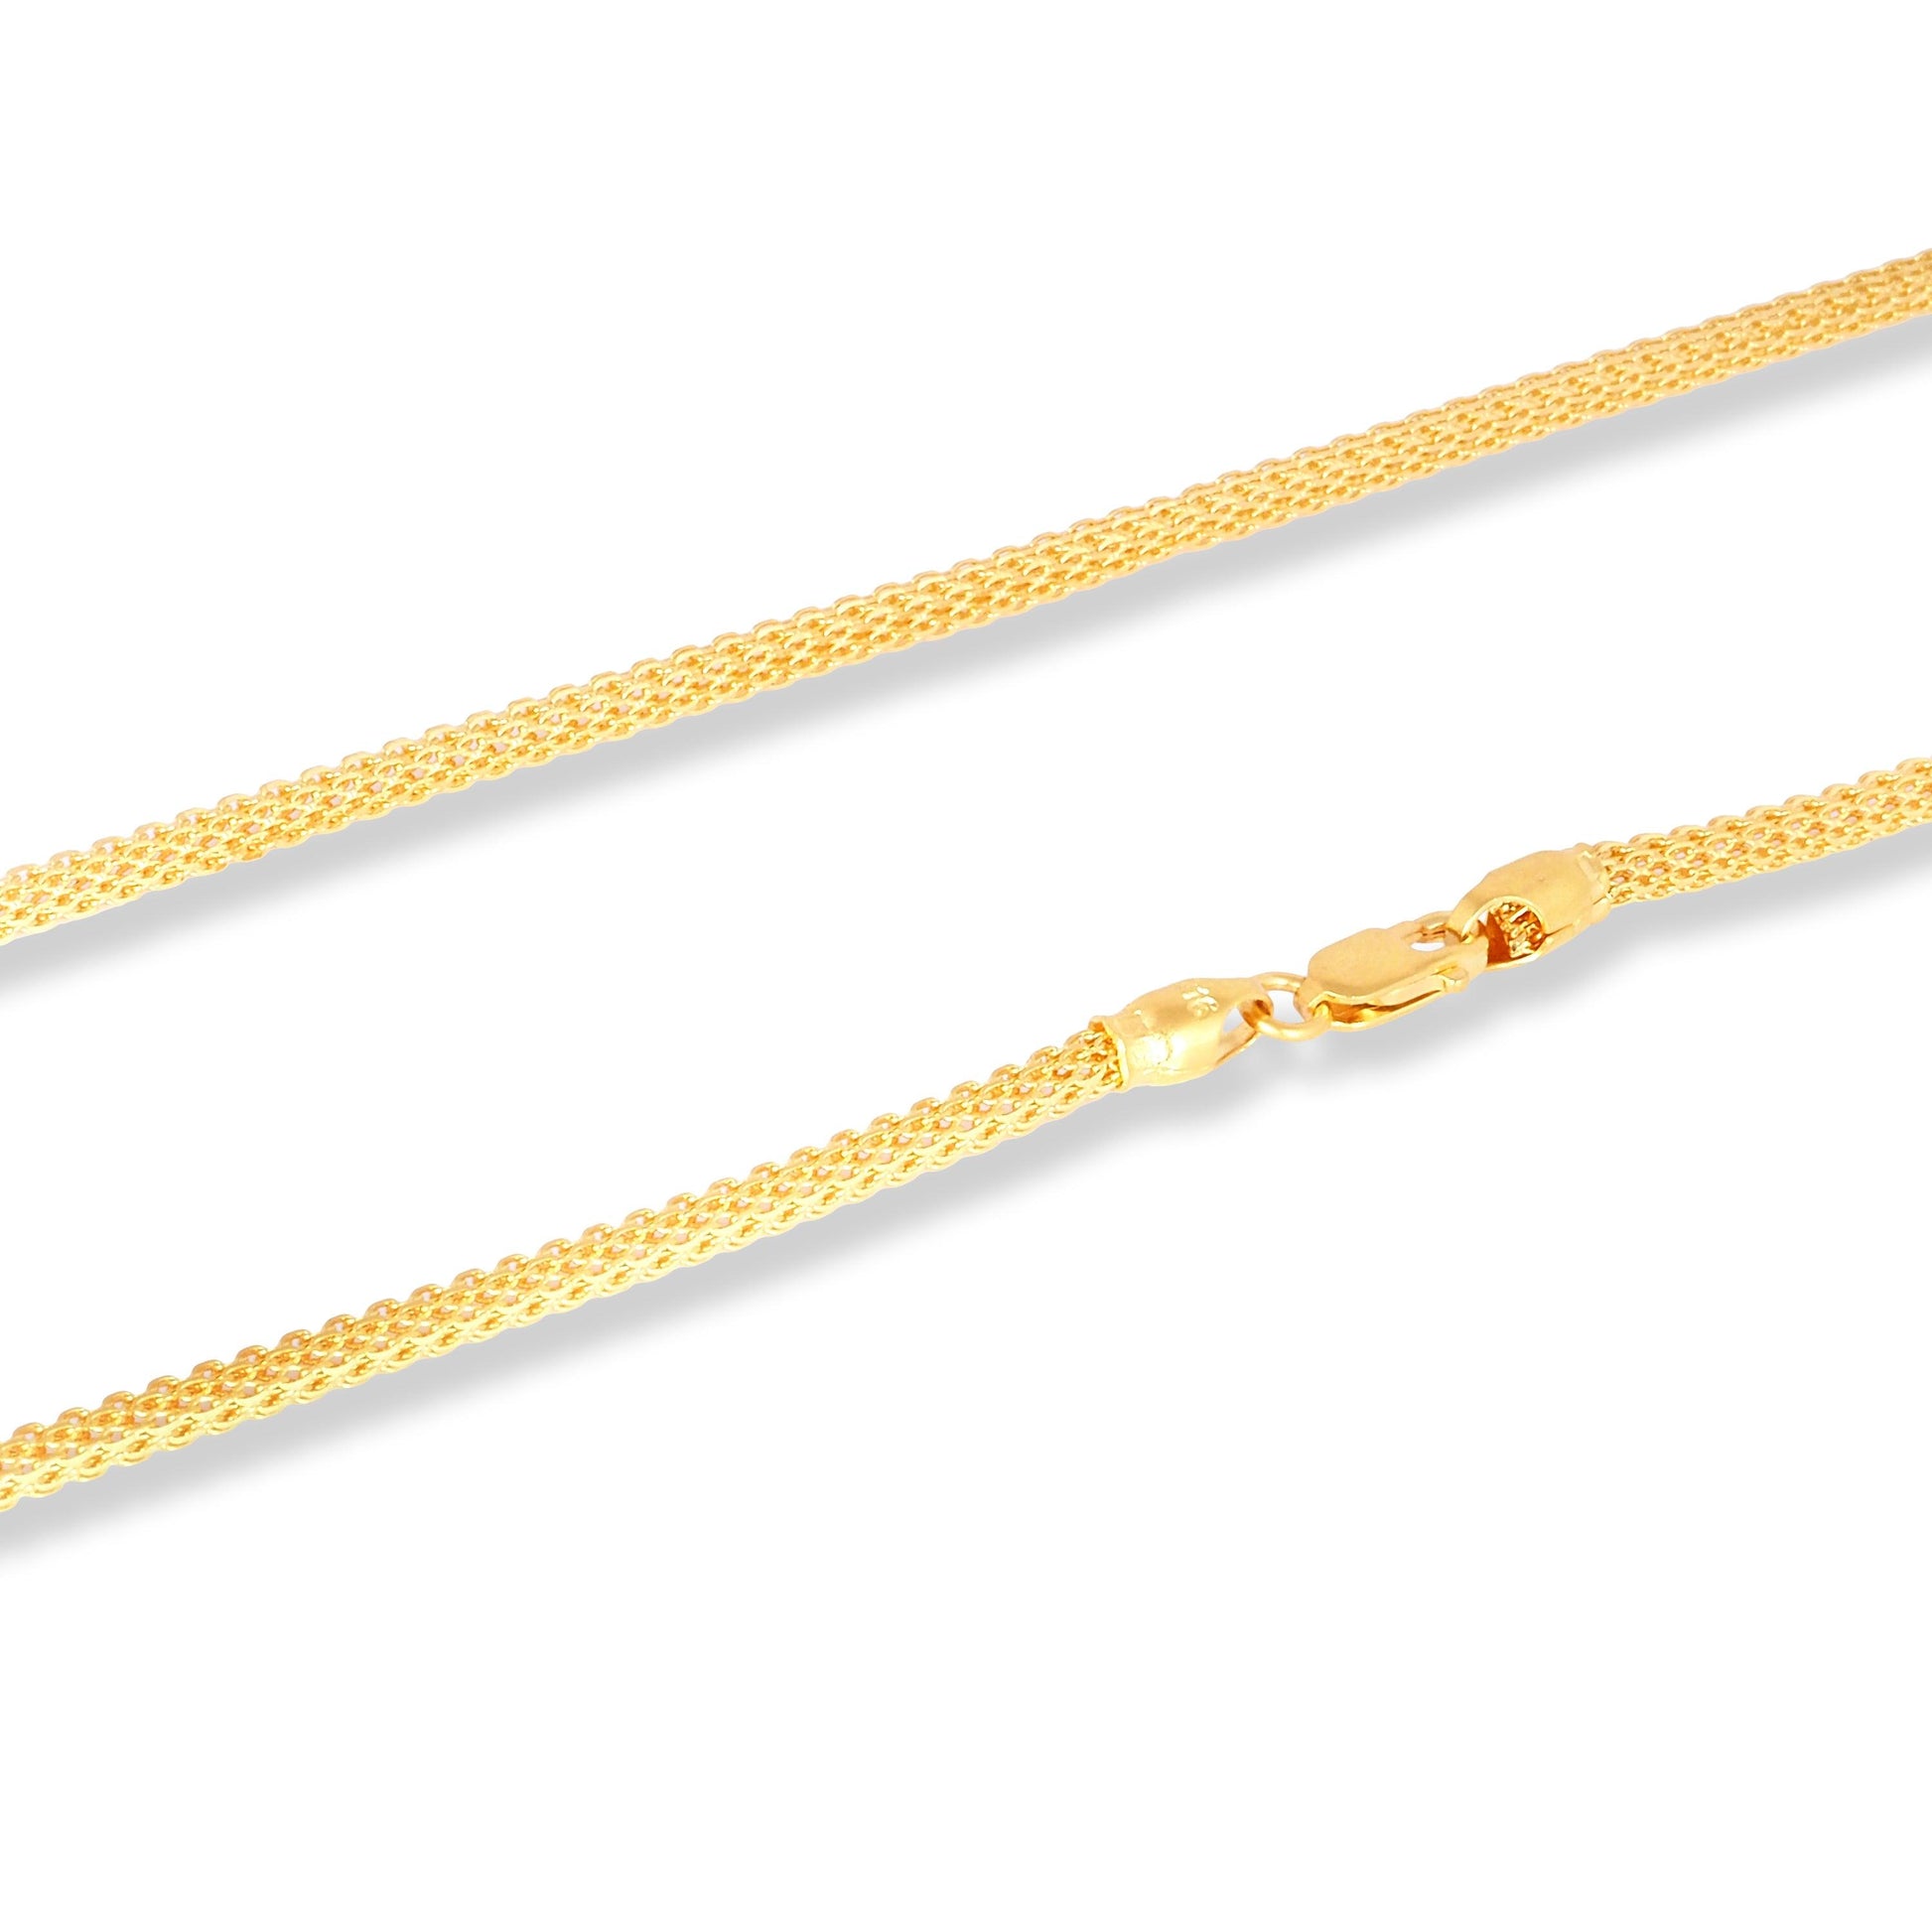 22ct Gold Hollow Milan Chain with Lobster Clasp C-7136 - Minar Jewellers